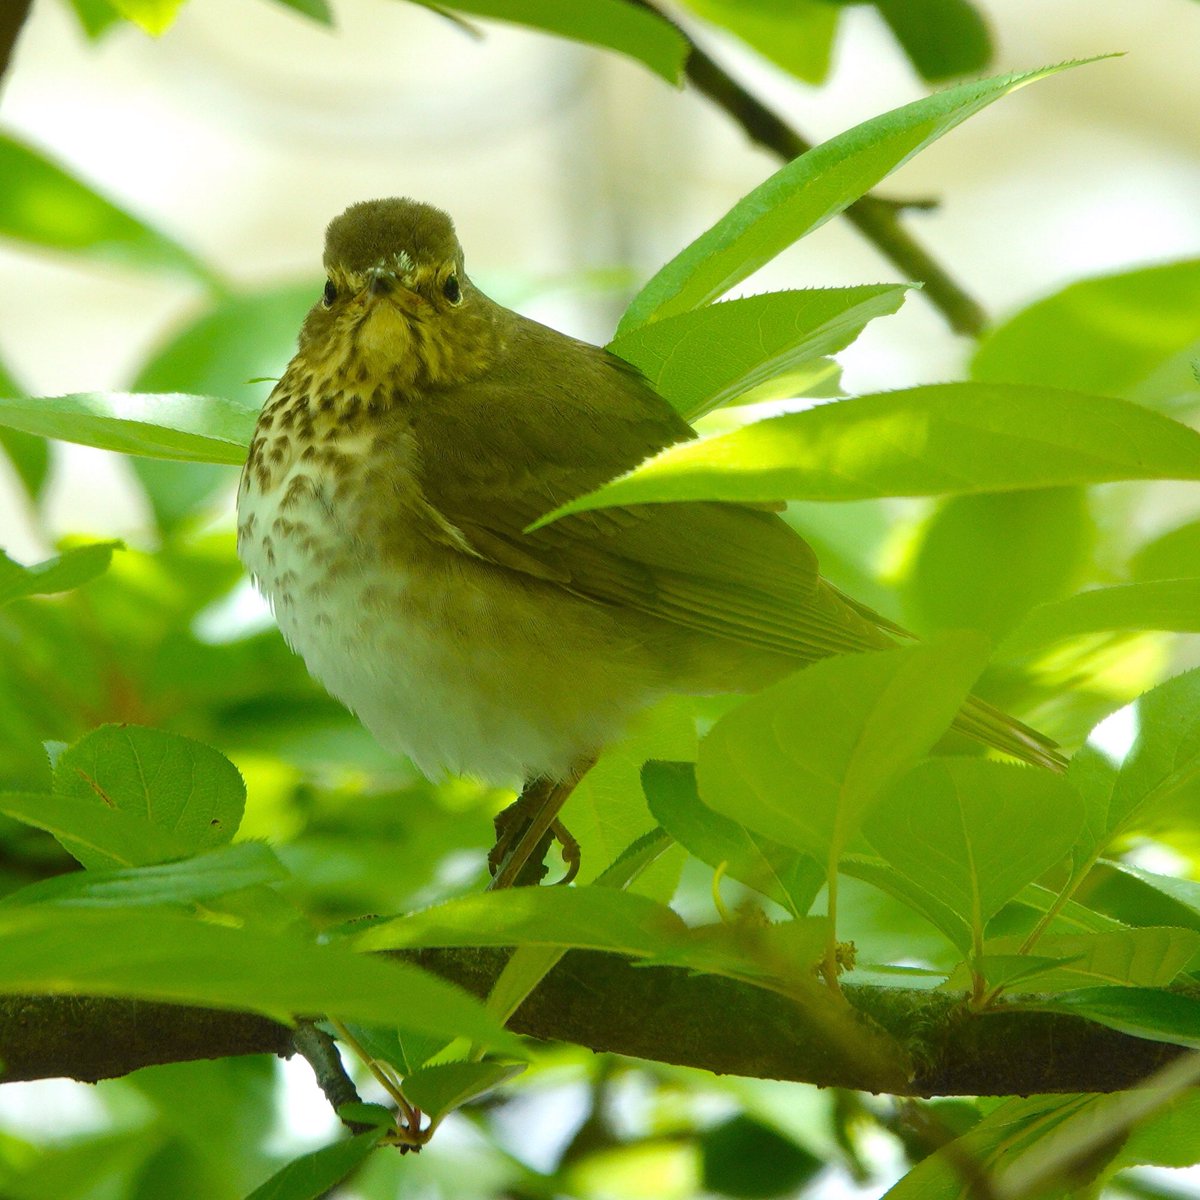 Spring migration - Swainson’s Thrush. Thrushes are known for their lovely flutelike songs.  Swainson’s Thrush is our only thrush whose song goes up in pitch. 05-09-23 #swainsonsthrush #thrush #birding #birdphotography #songbirds #birds #birdcpp #birdcp